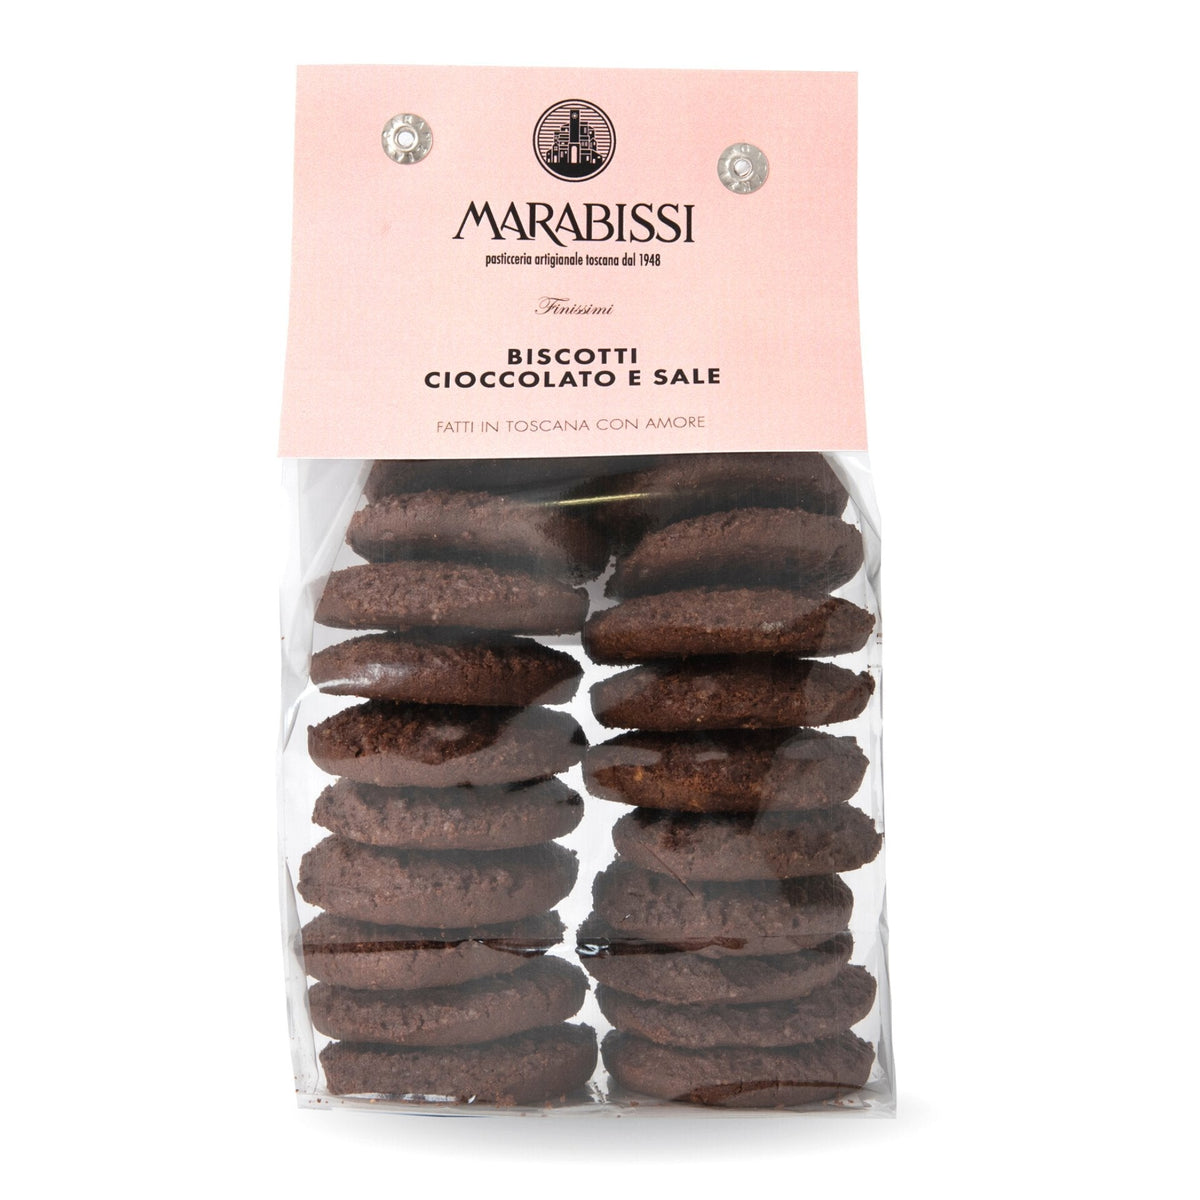 Marabissi Chocolate &amp; Sea Salt Artisan Biscuits (Bag) 200g  | Imported and distributed in the UK by Just Gourmet Foods